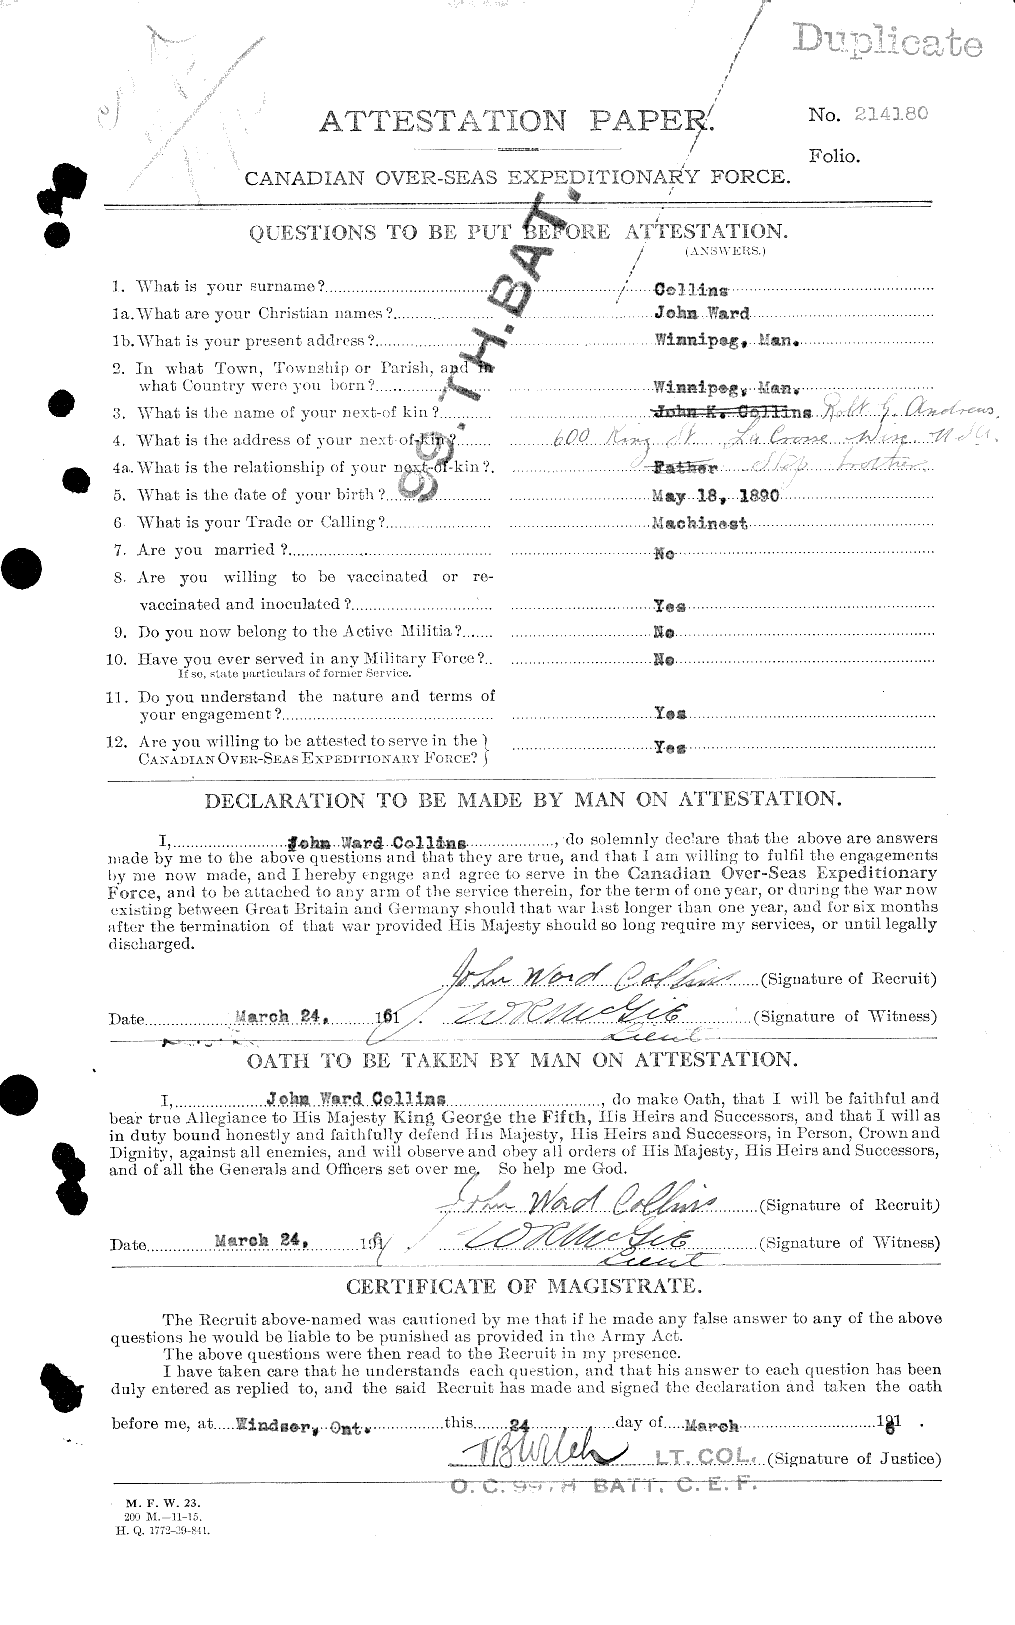 Personnel Records of the First World War - CEF 034388a